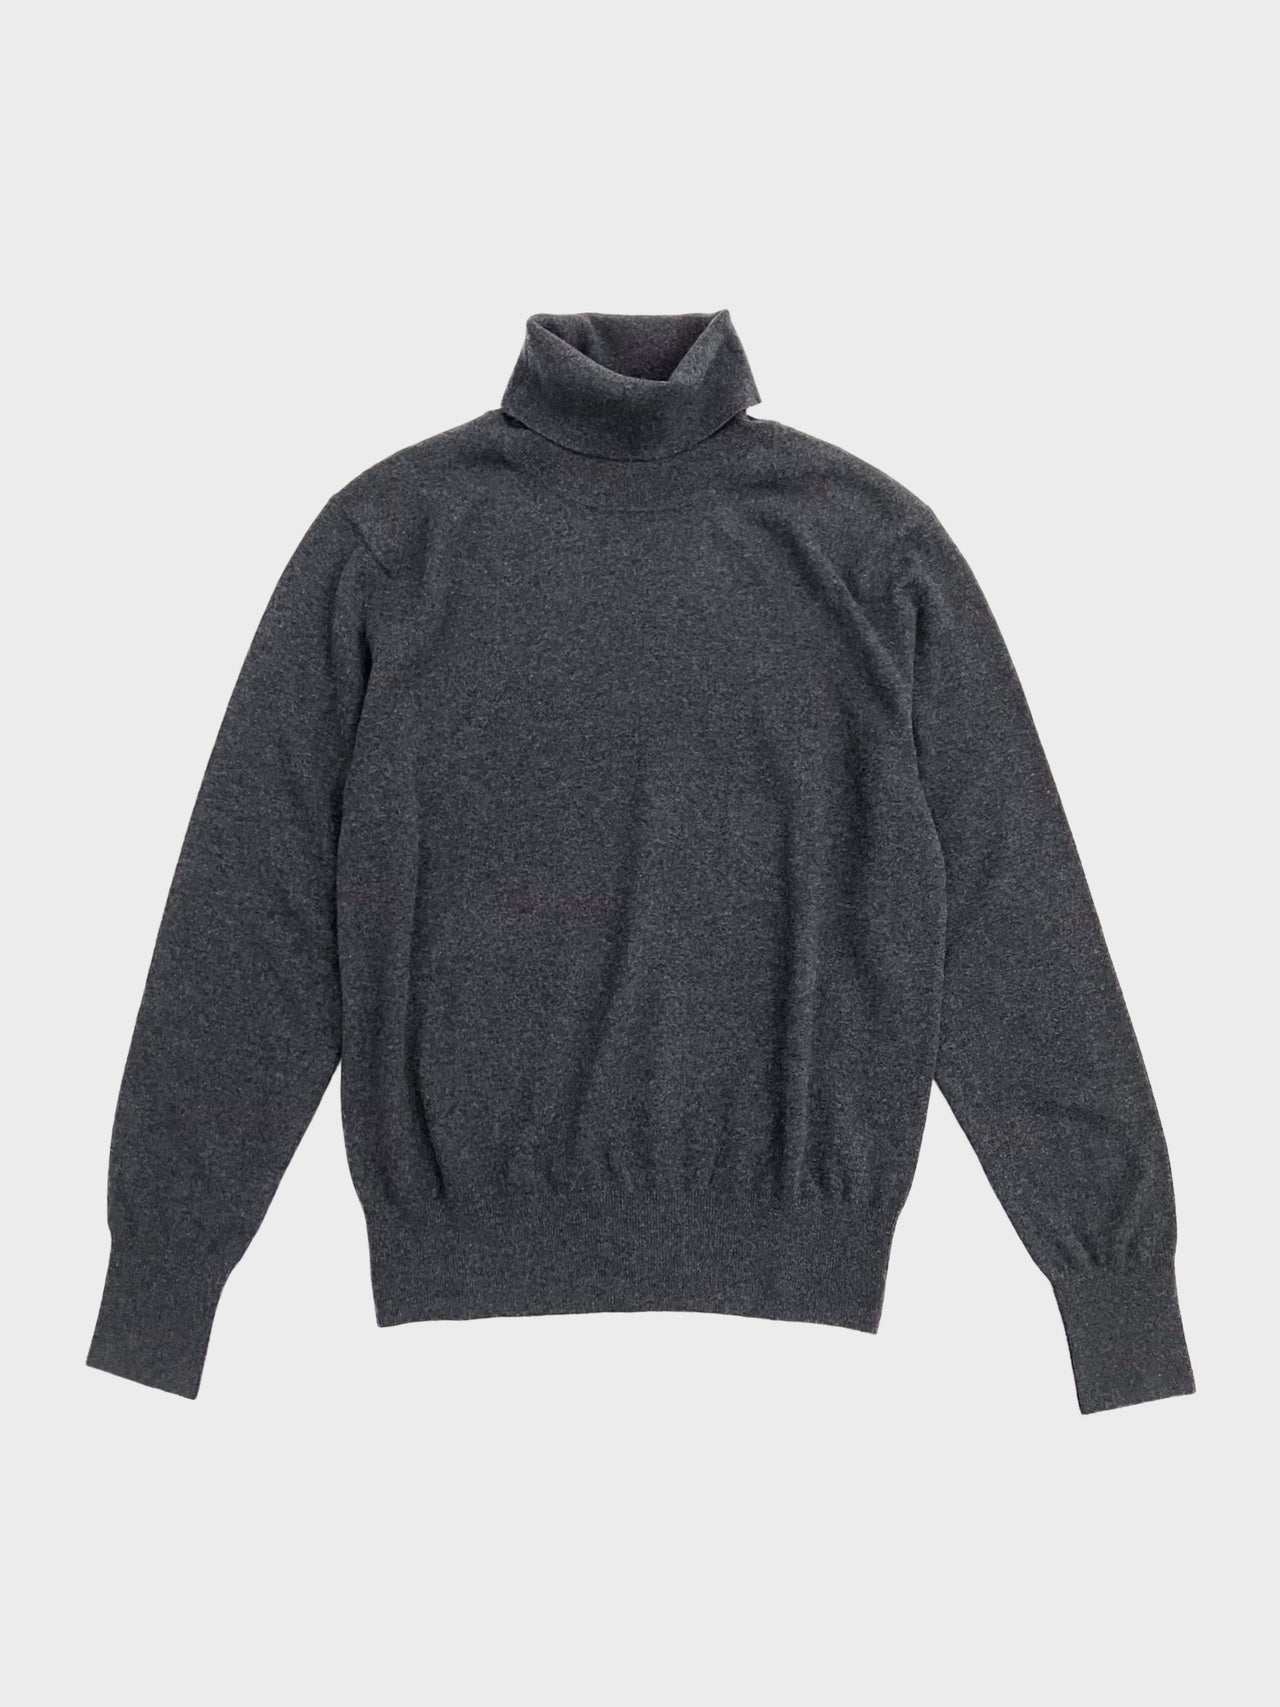 PICEA / 14GG HIGH NECK KNIT (CHARCOAL)